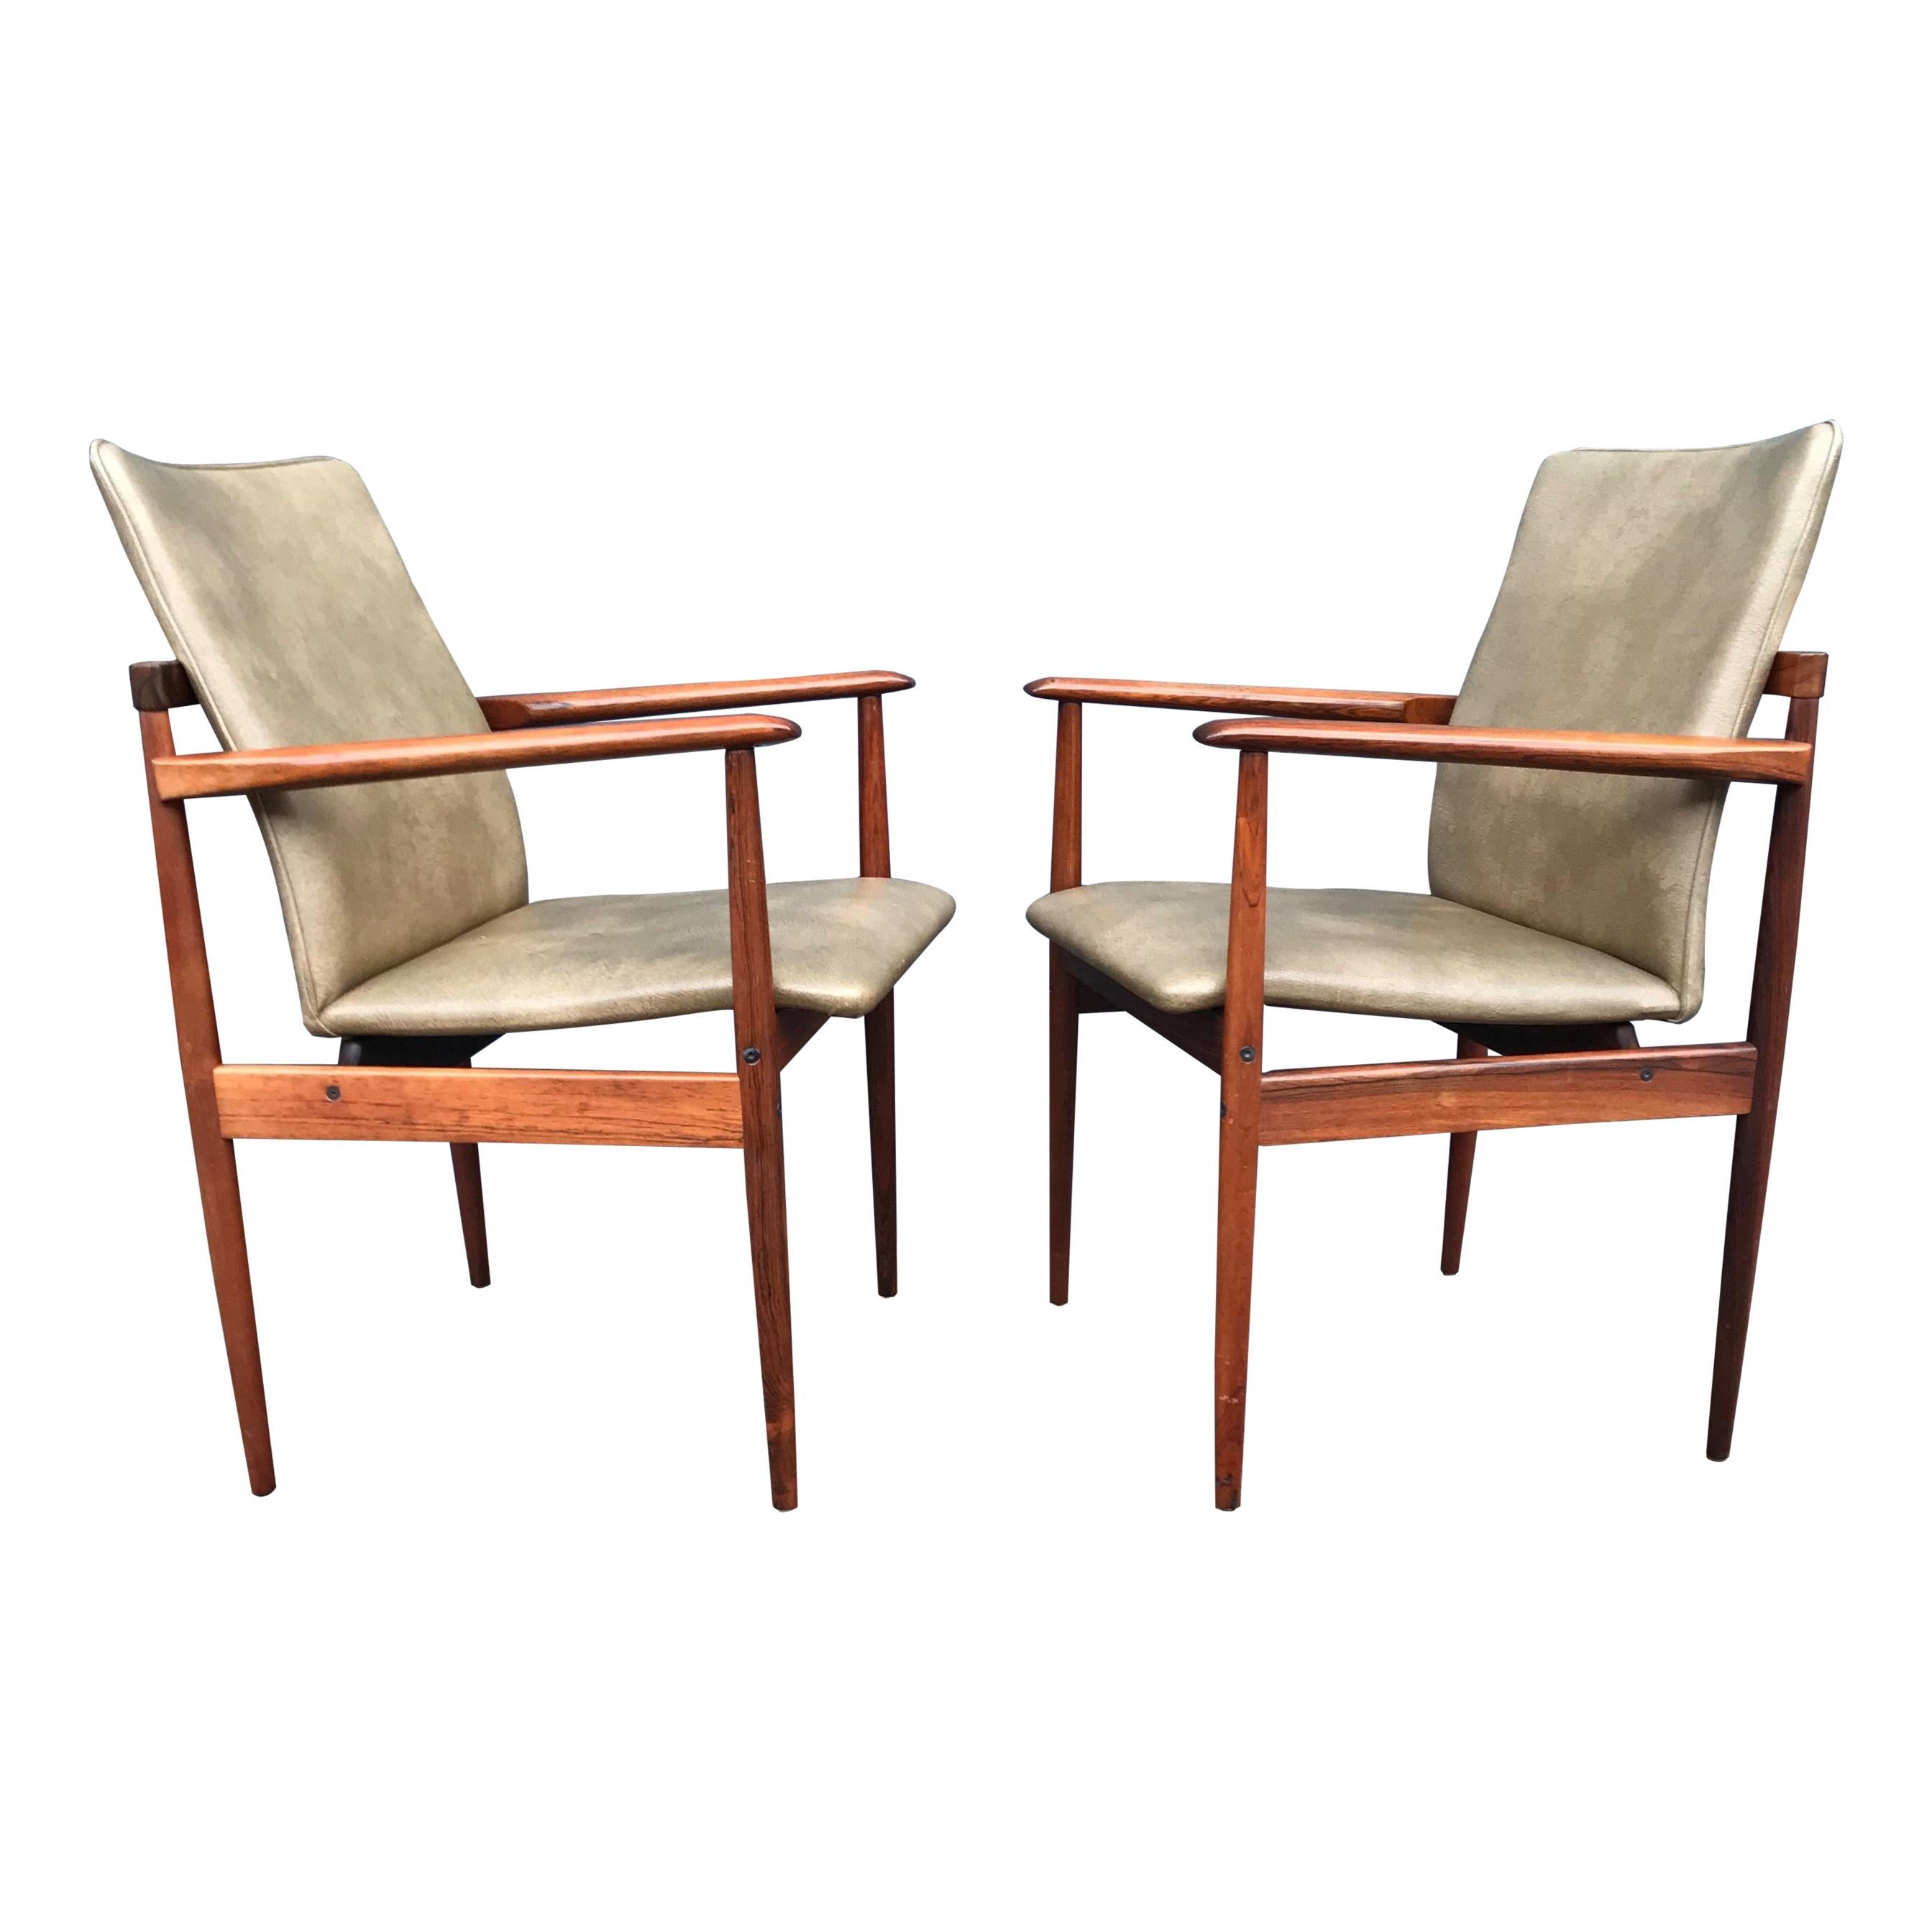 Stunning & Stylish Pair of Handcrafted Midcentury Modern Solid Wooden Armchairs For Sale